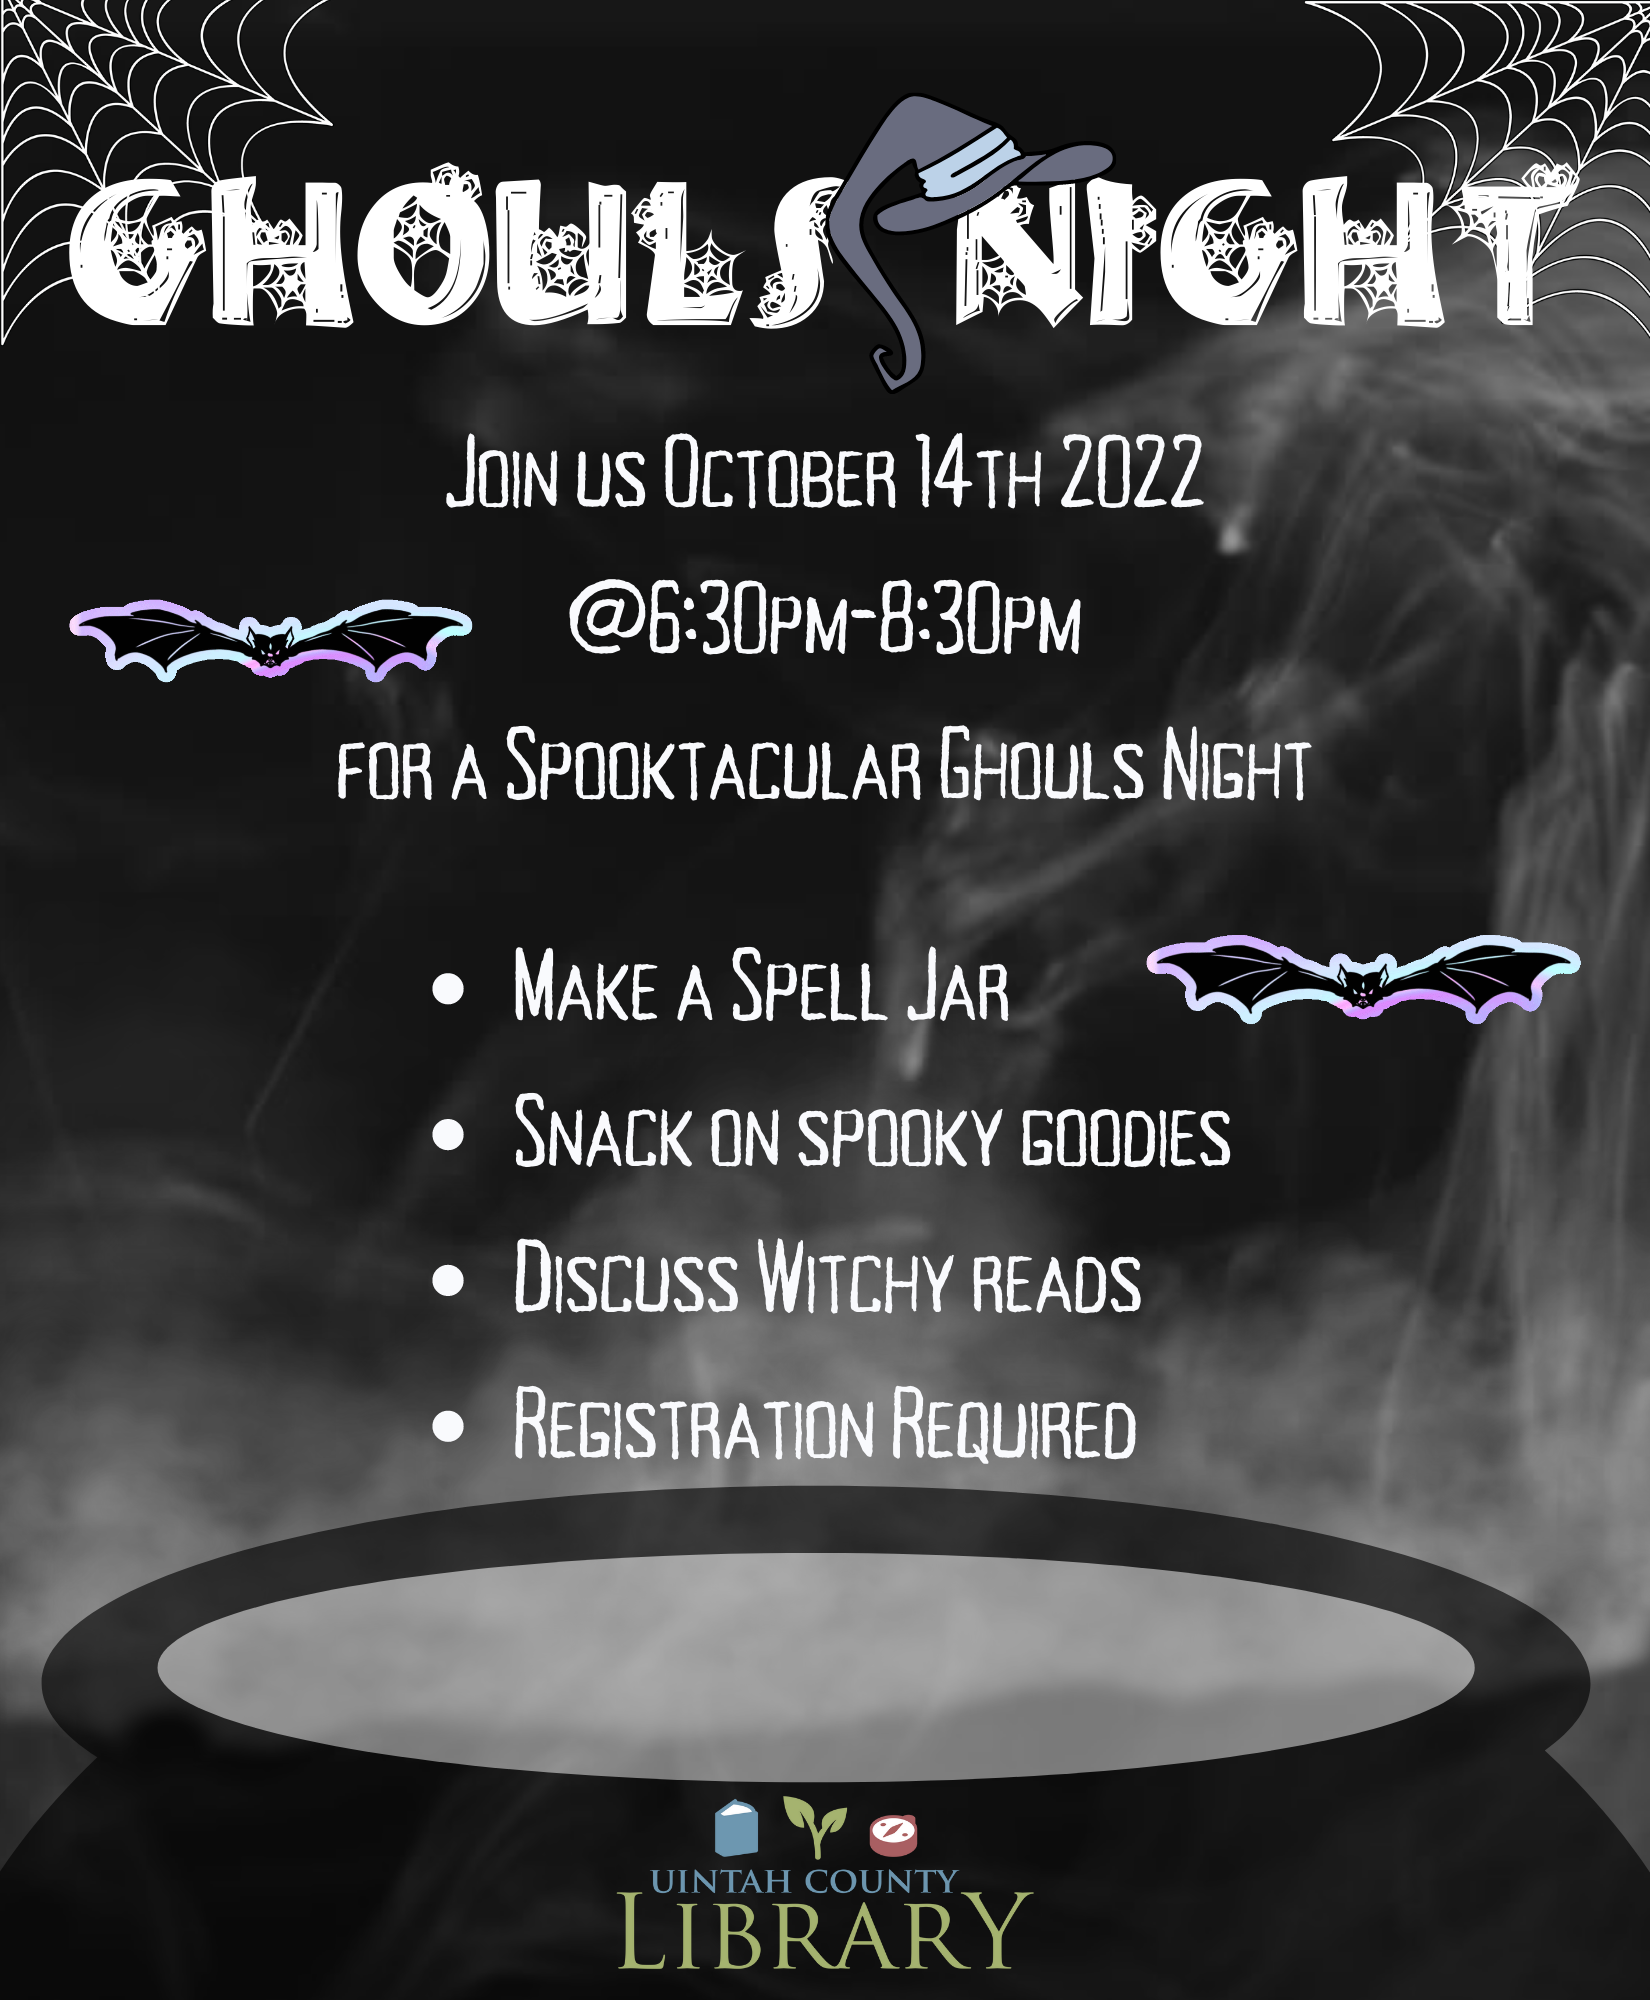 Ghouls Night Out Join us October 14th 2022 @6:30pm-8:30pm for a Spooktacular Ghouls Night  Make a Spell Jar Snack on spooky goodies  Discuss Witchy reads Registration Required